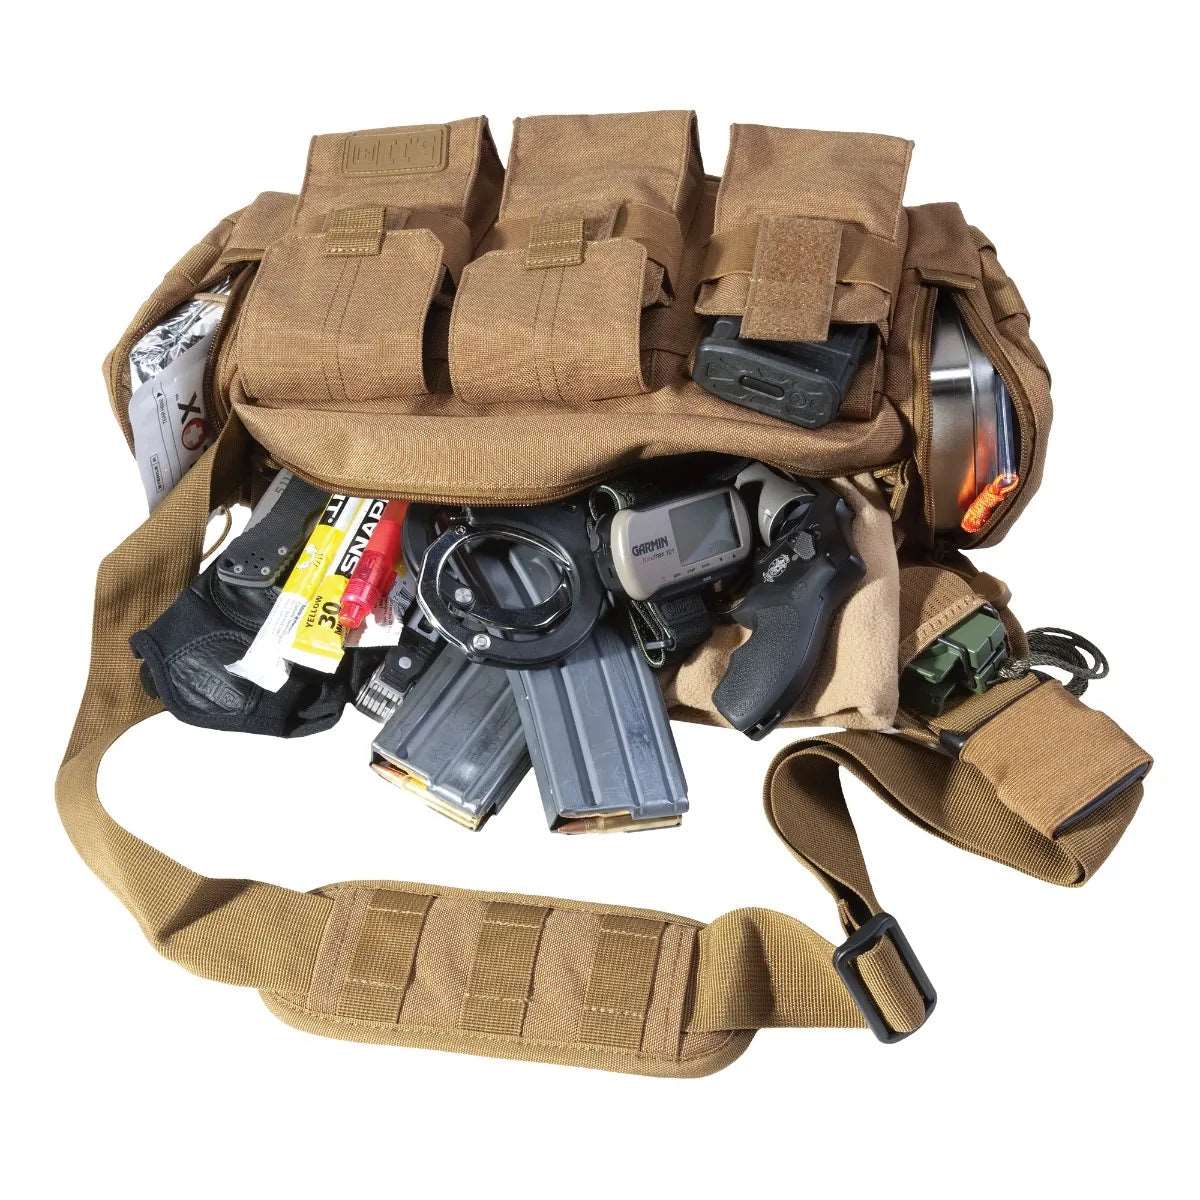 Luggage & Bags - 5.11 Tactical Bail Out Bag 9L